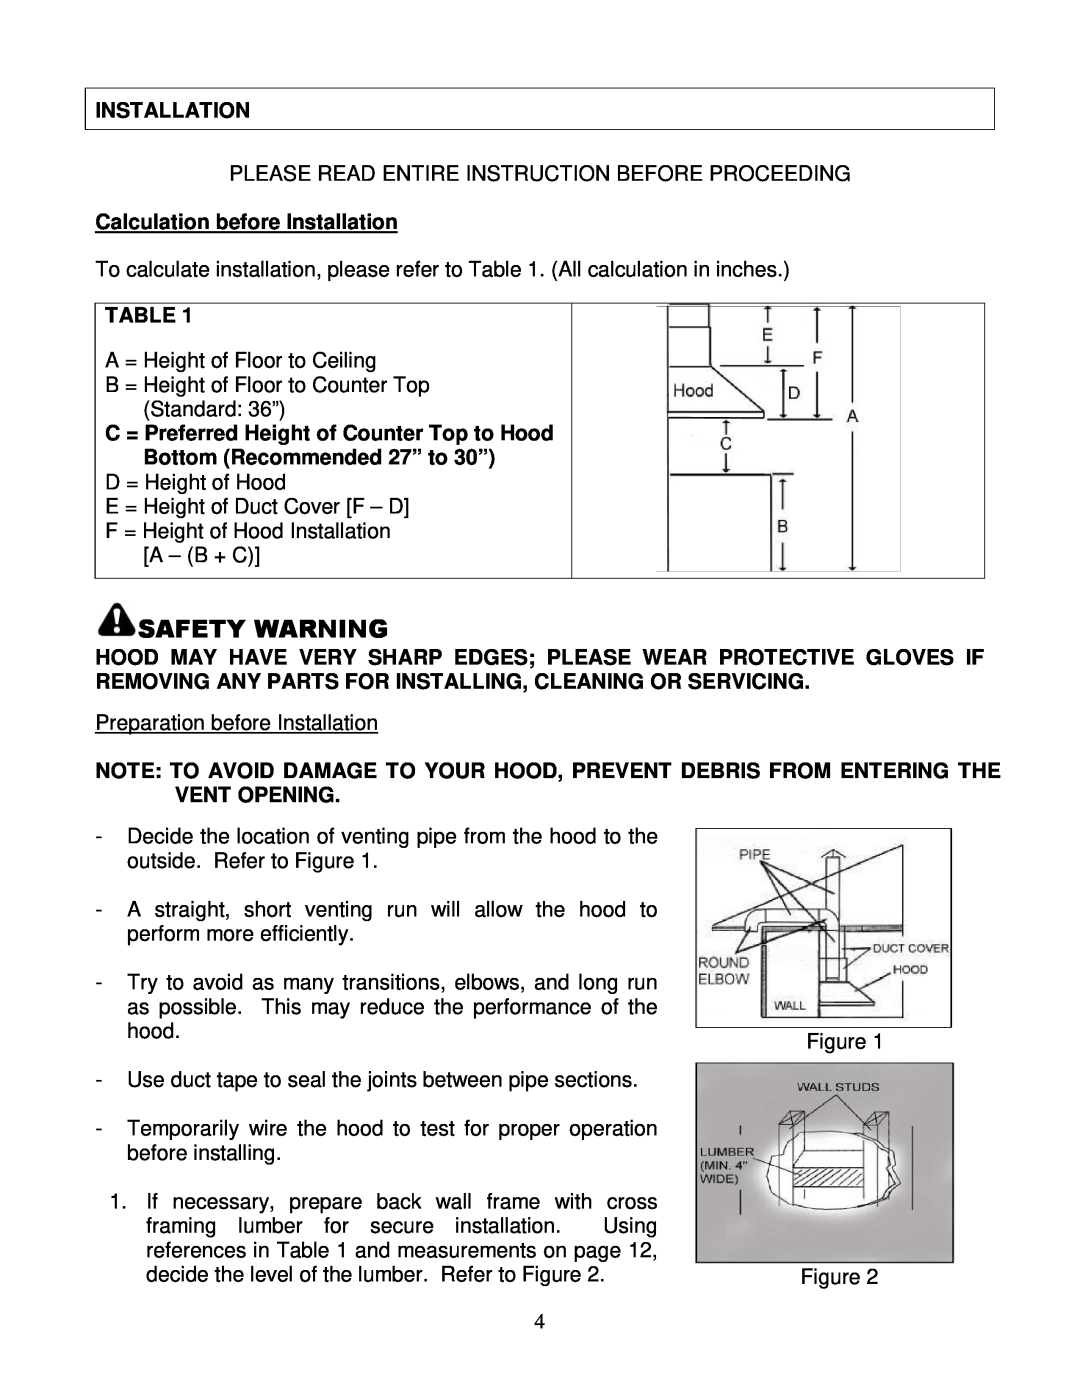 Kobe Range Hoods CH8136SQB Safety Warning, Calculation before Installation, Bottom Recommended 27” to 30” 